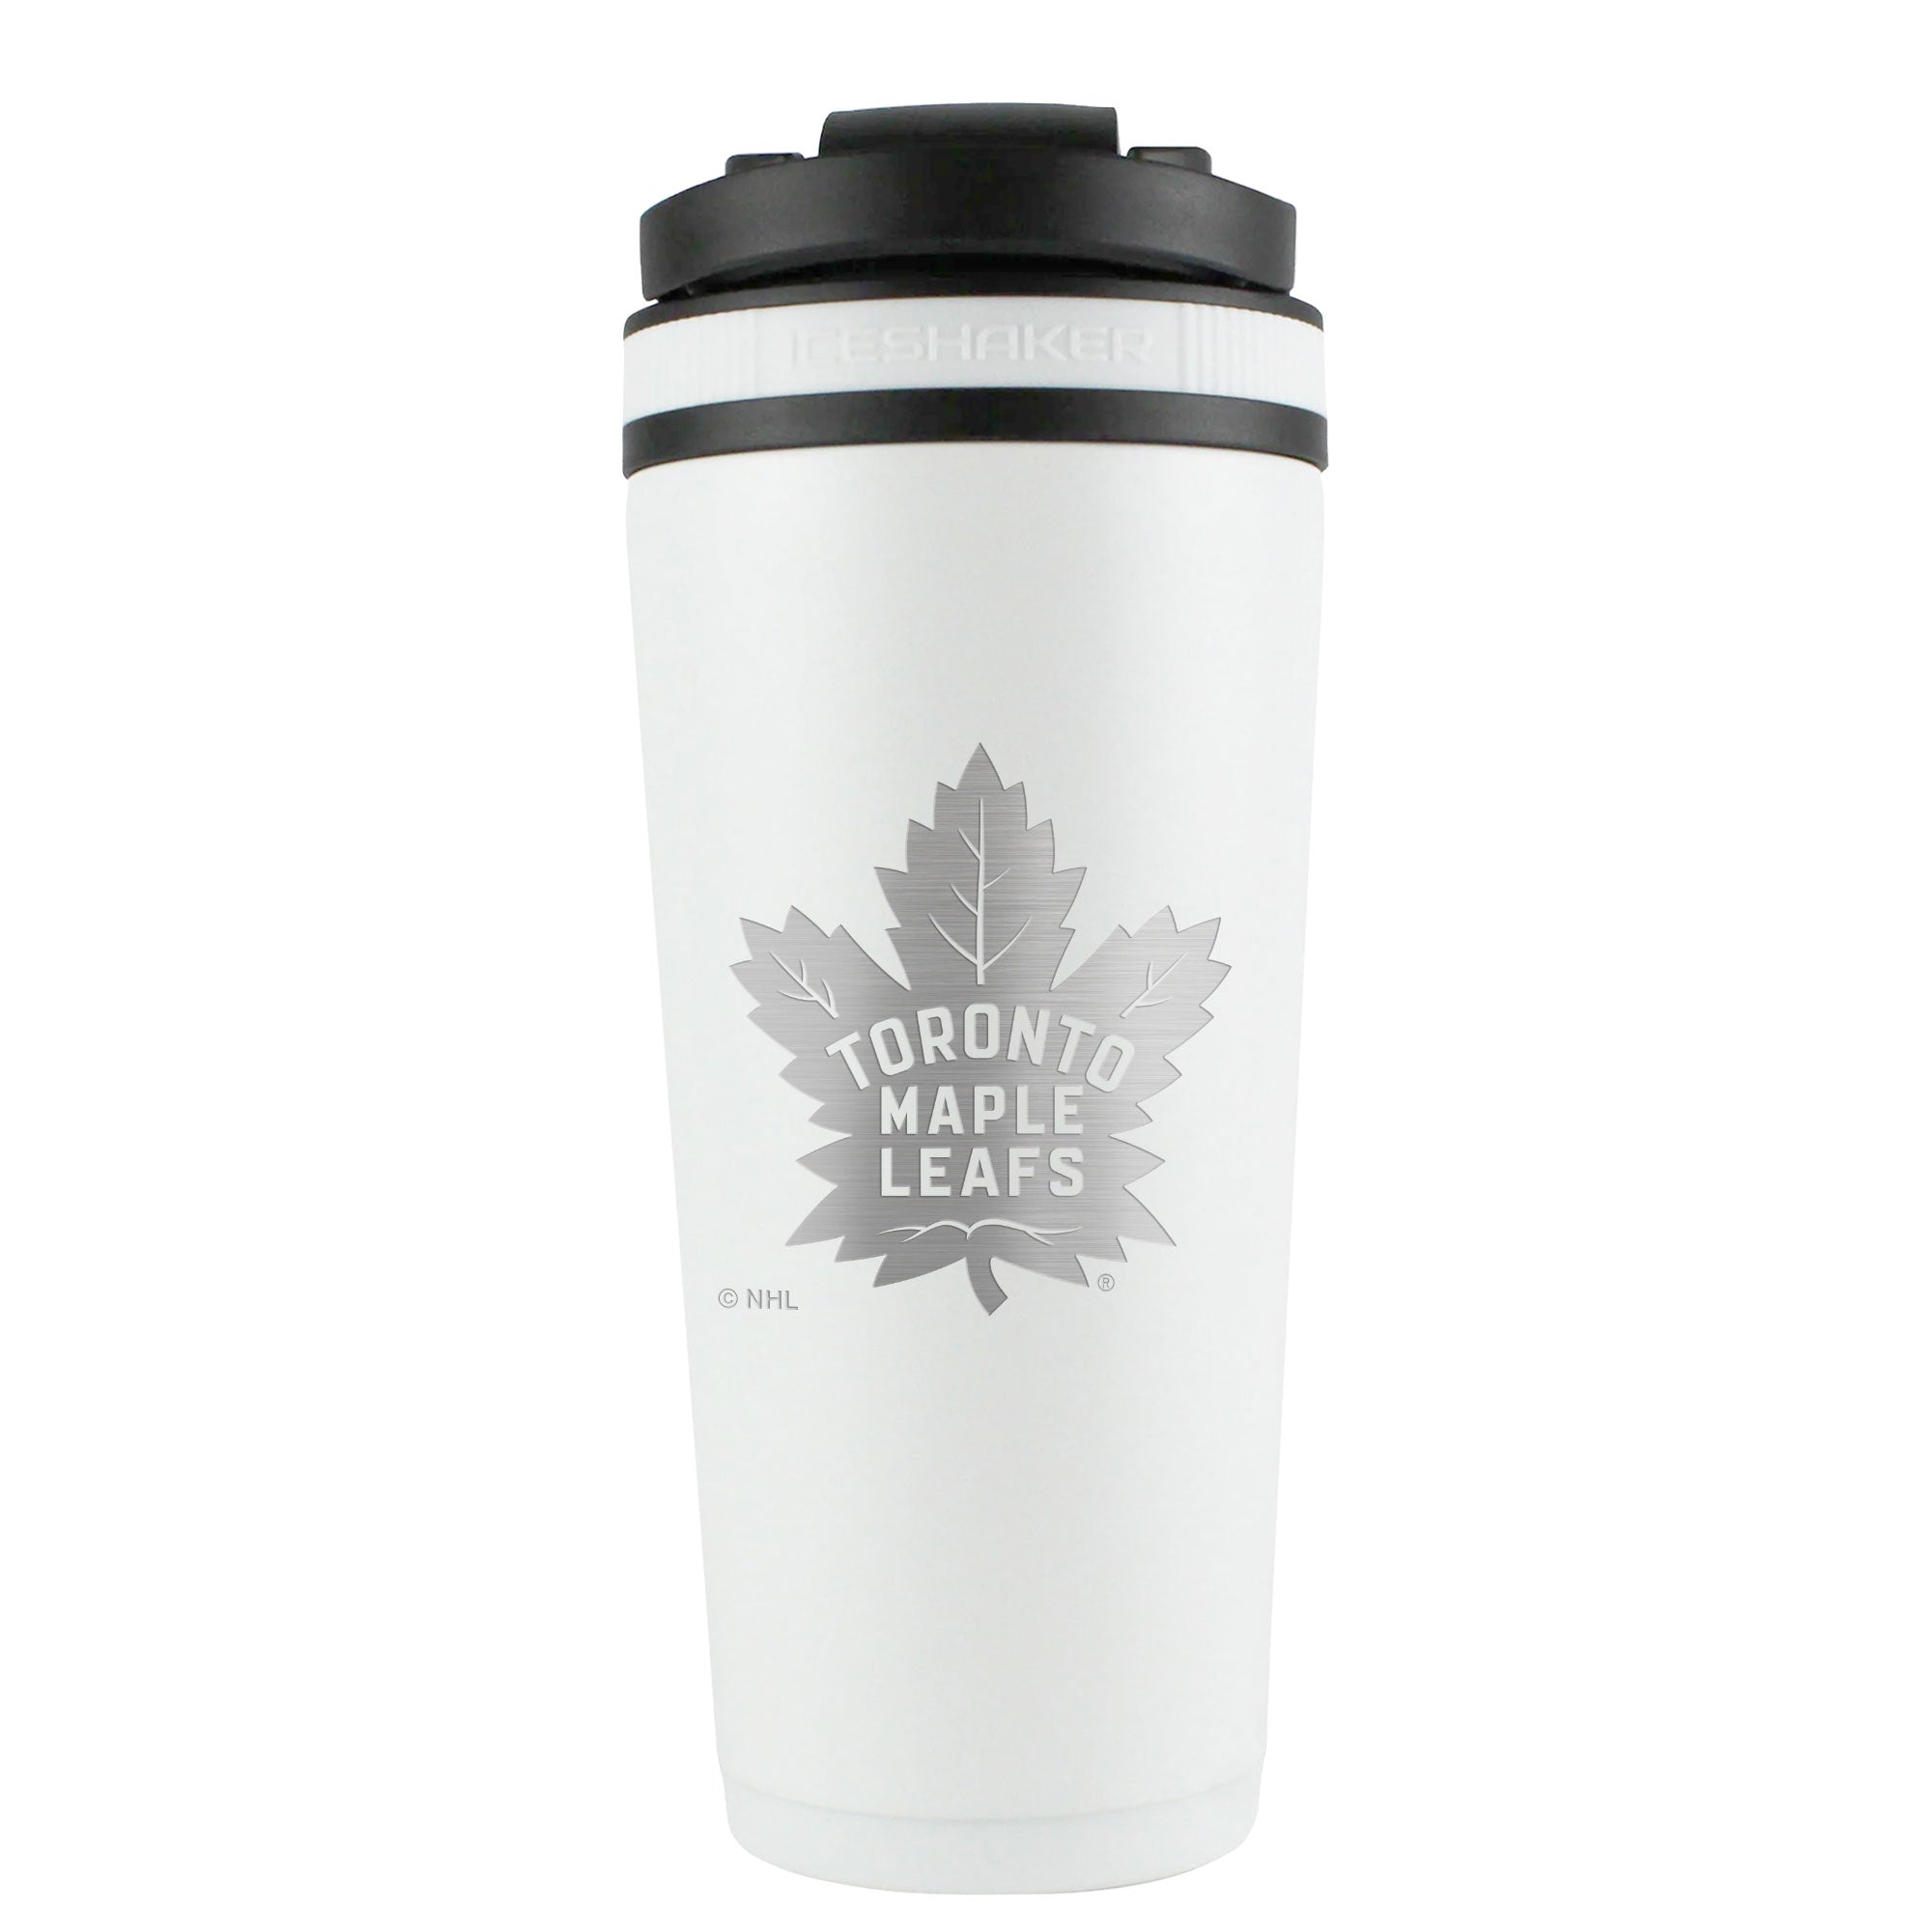 Officially Licensed Toronto Maple Leafs 26oz Ice Shaker - White